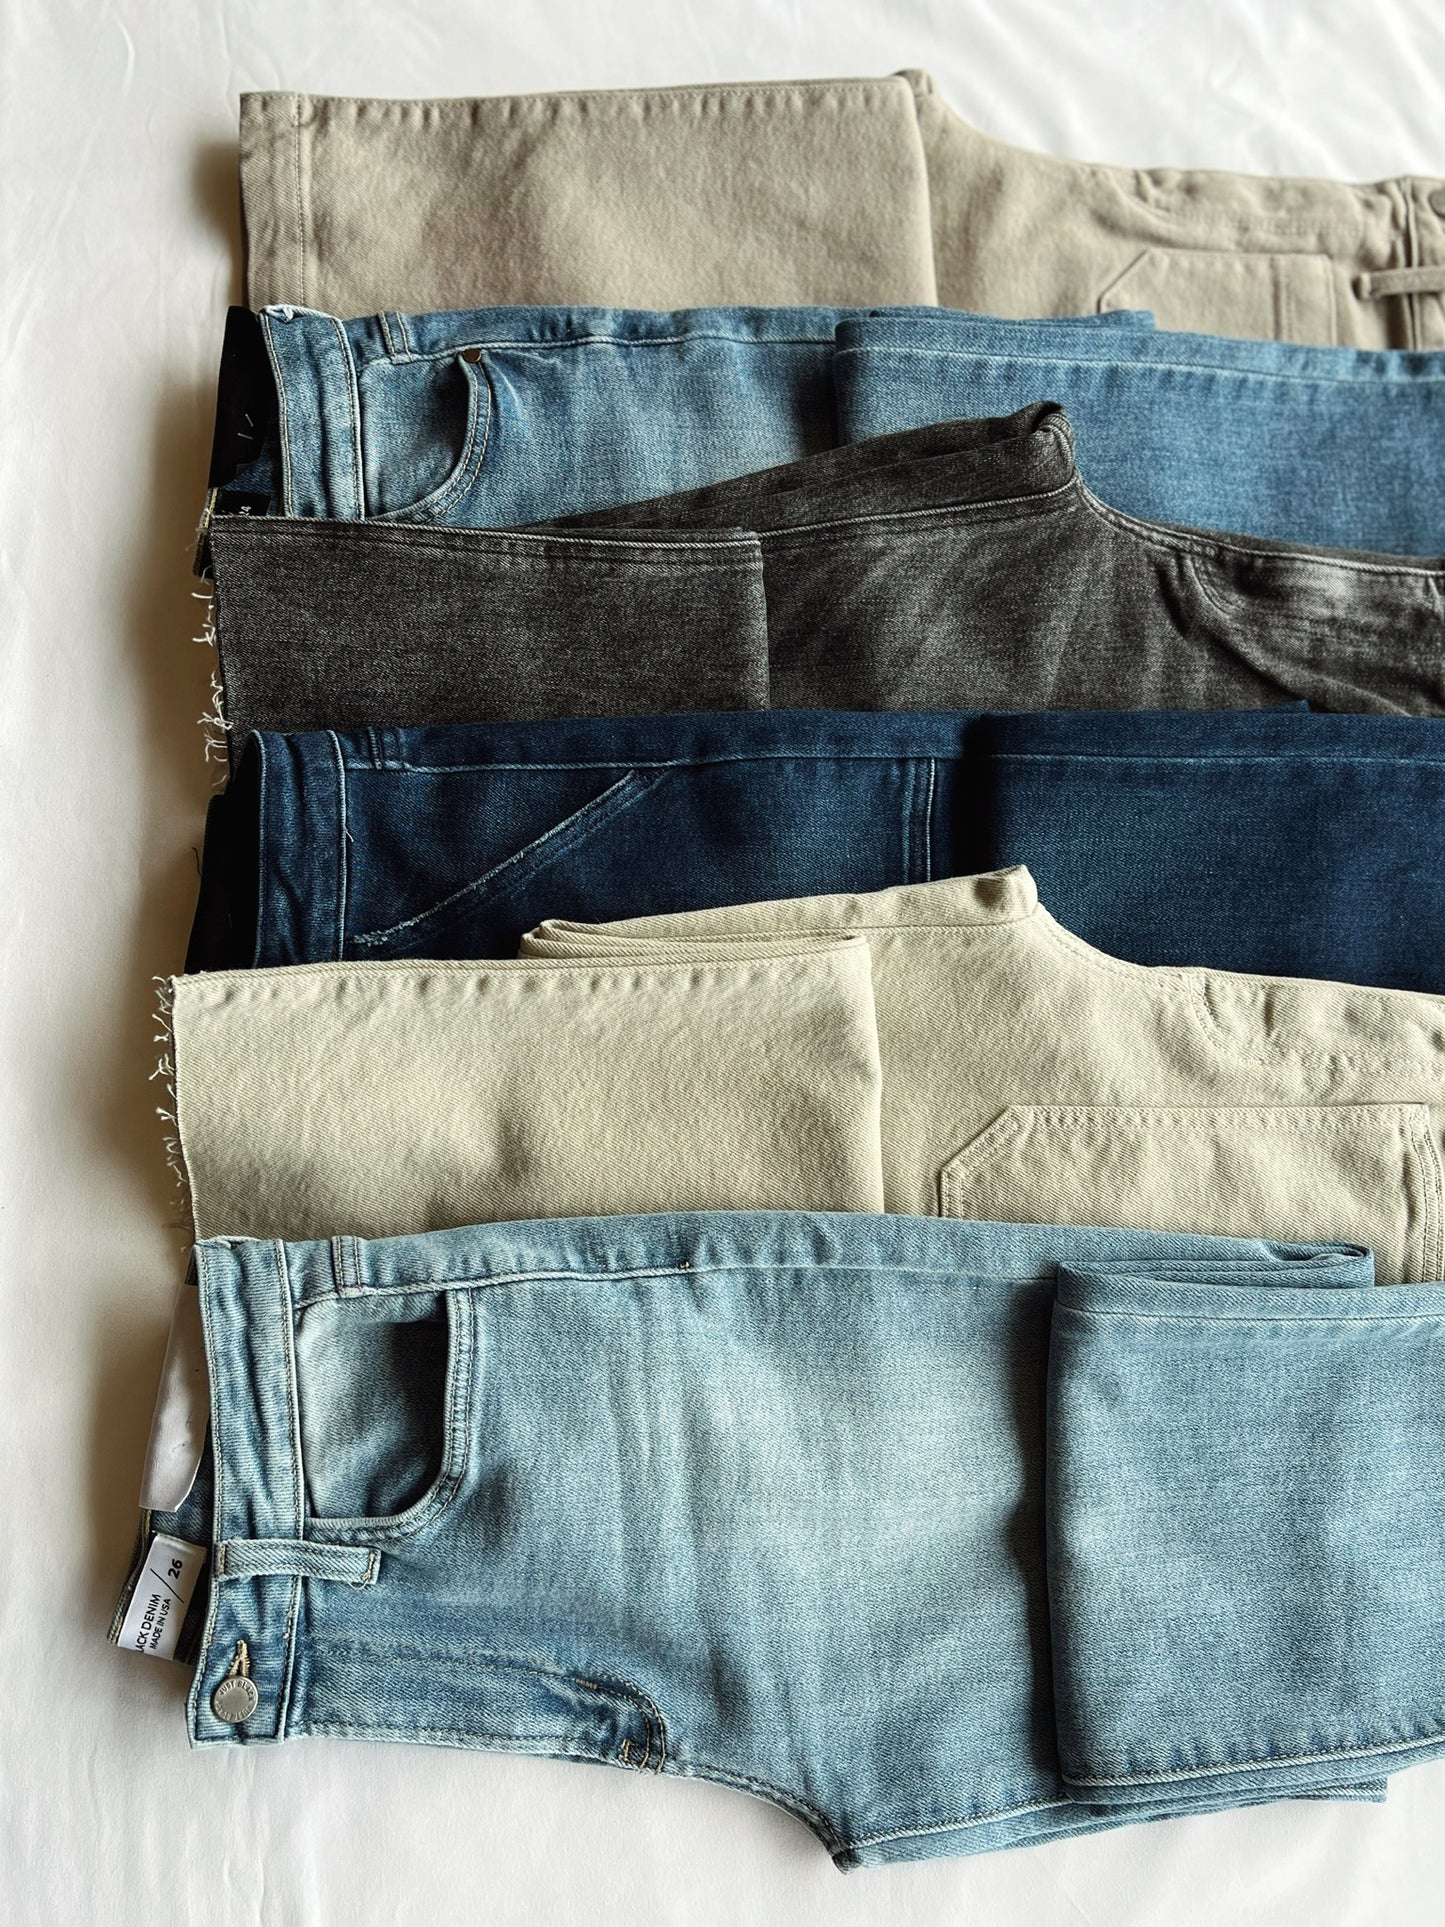 Get Your Denim Fix: Top Styles for Every Body Type!